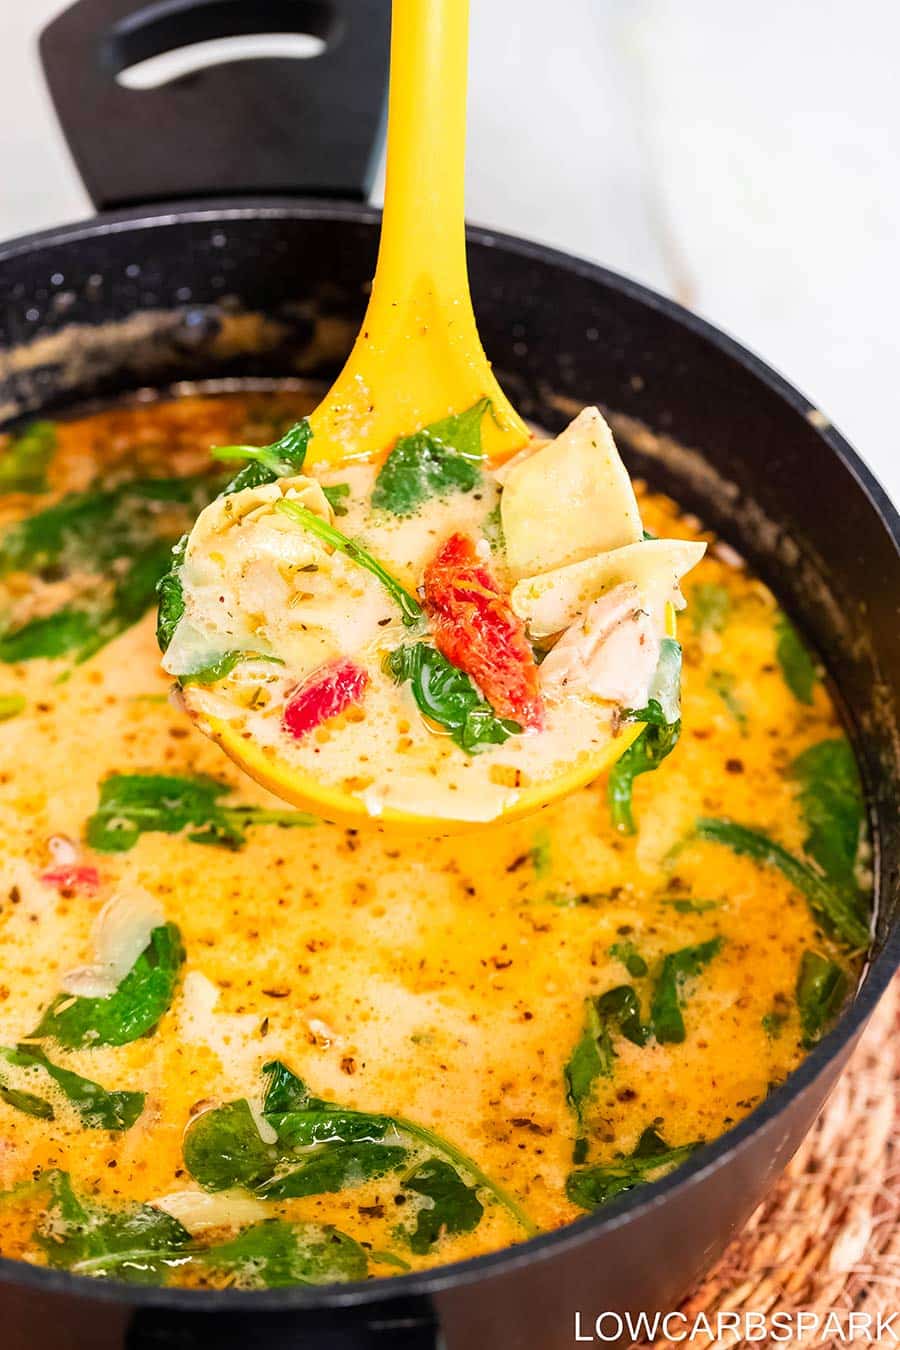 Tuscan Chicken Soup